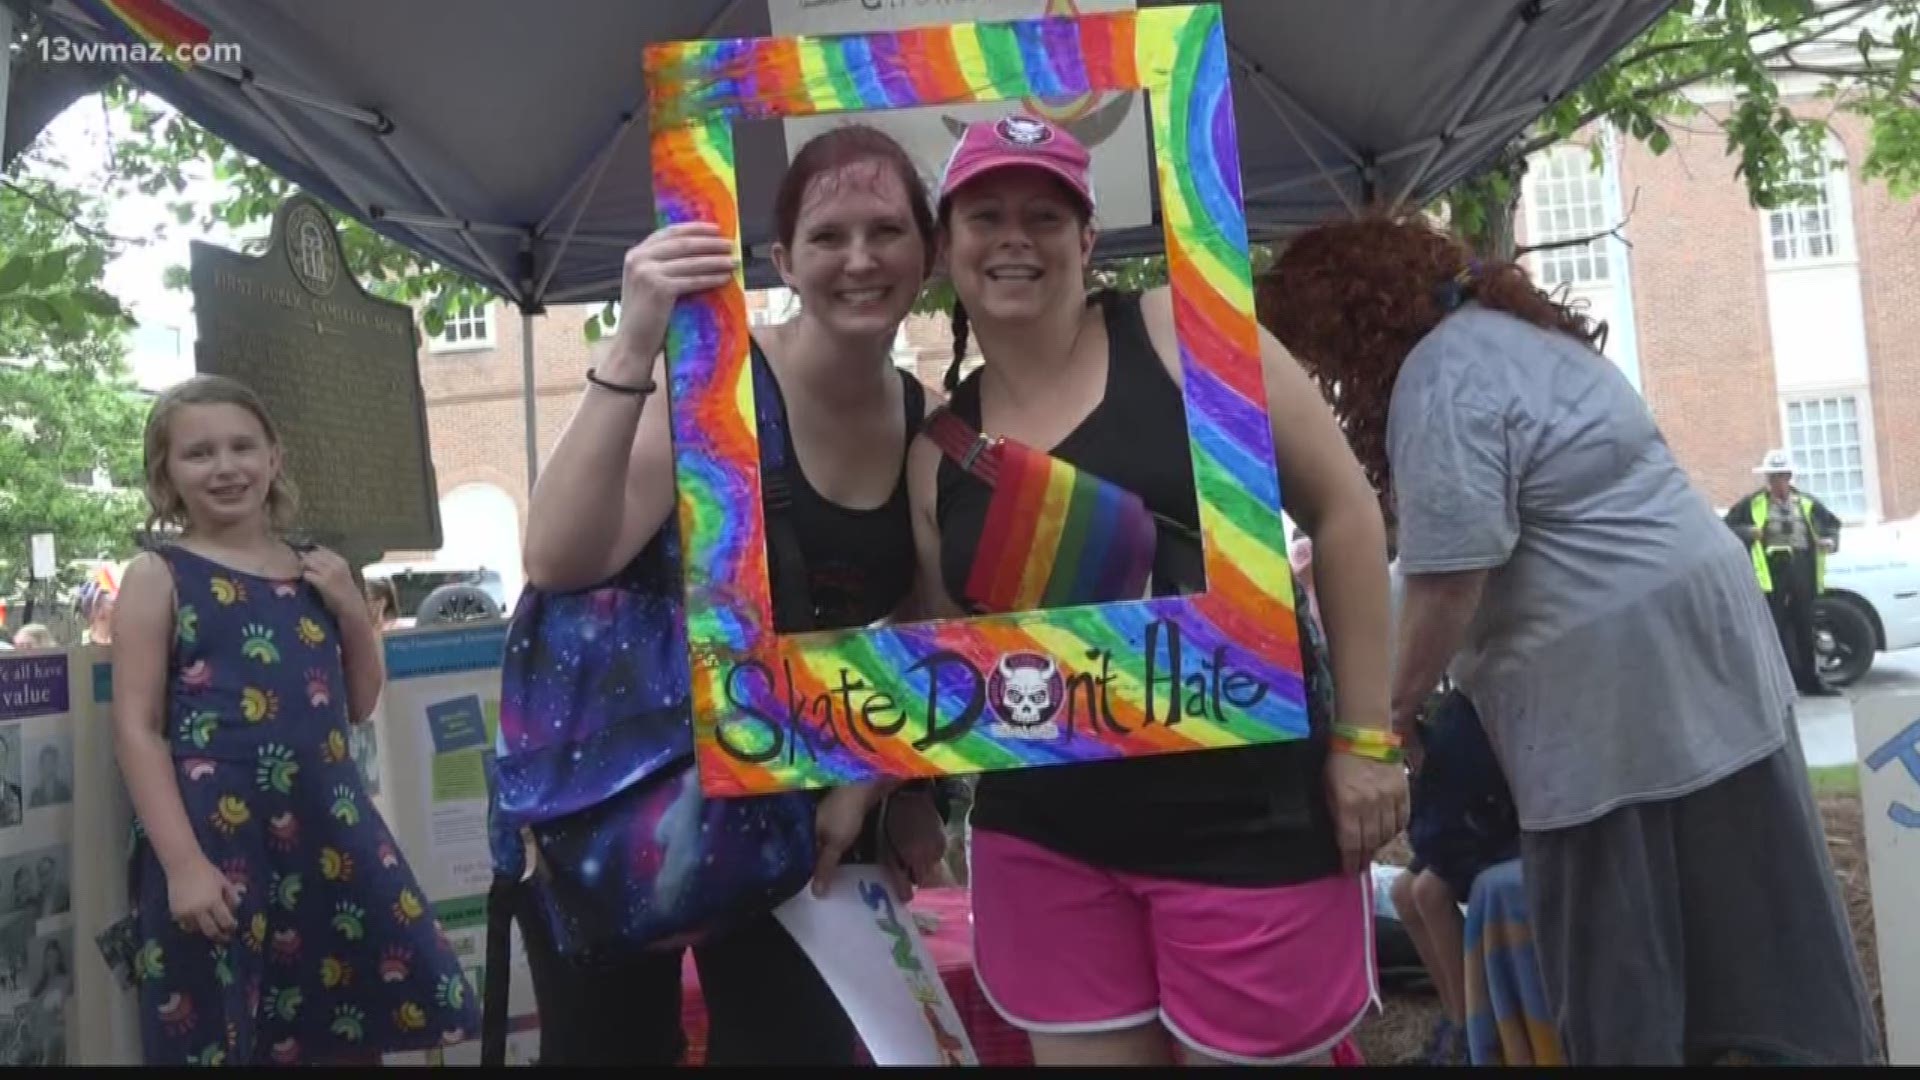 Macon celebrated Pride Month downtown on Saturday. Love and acceptance was the message many wanted to get across.